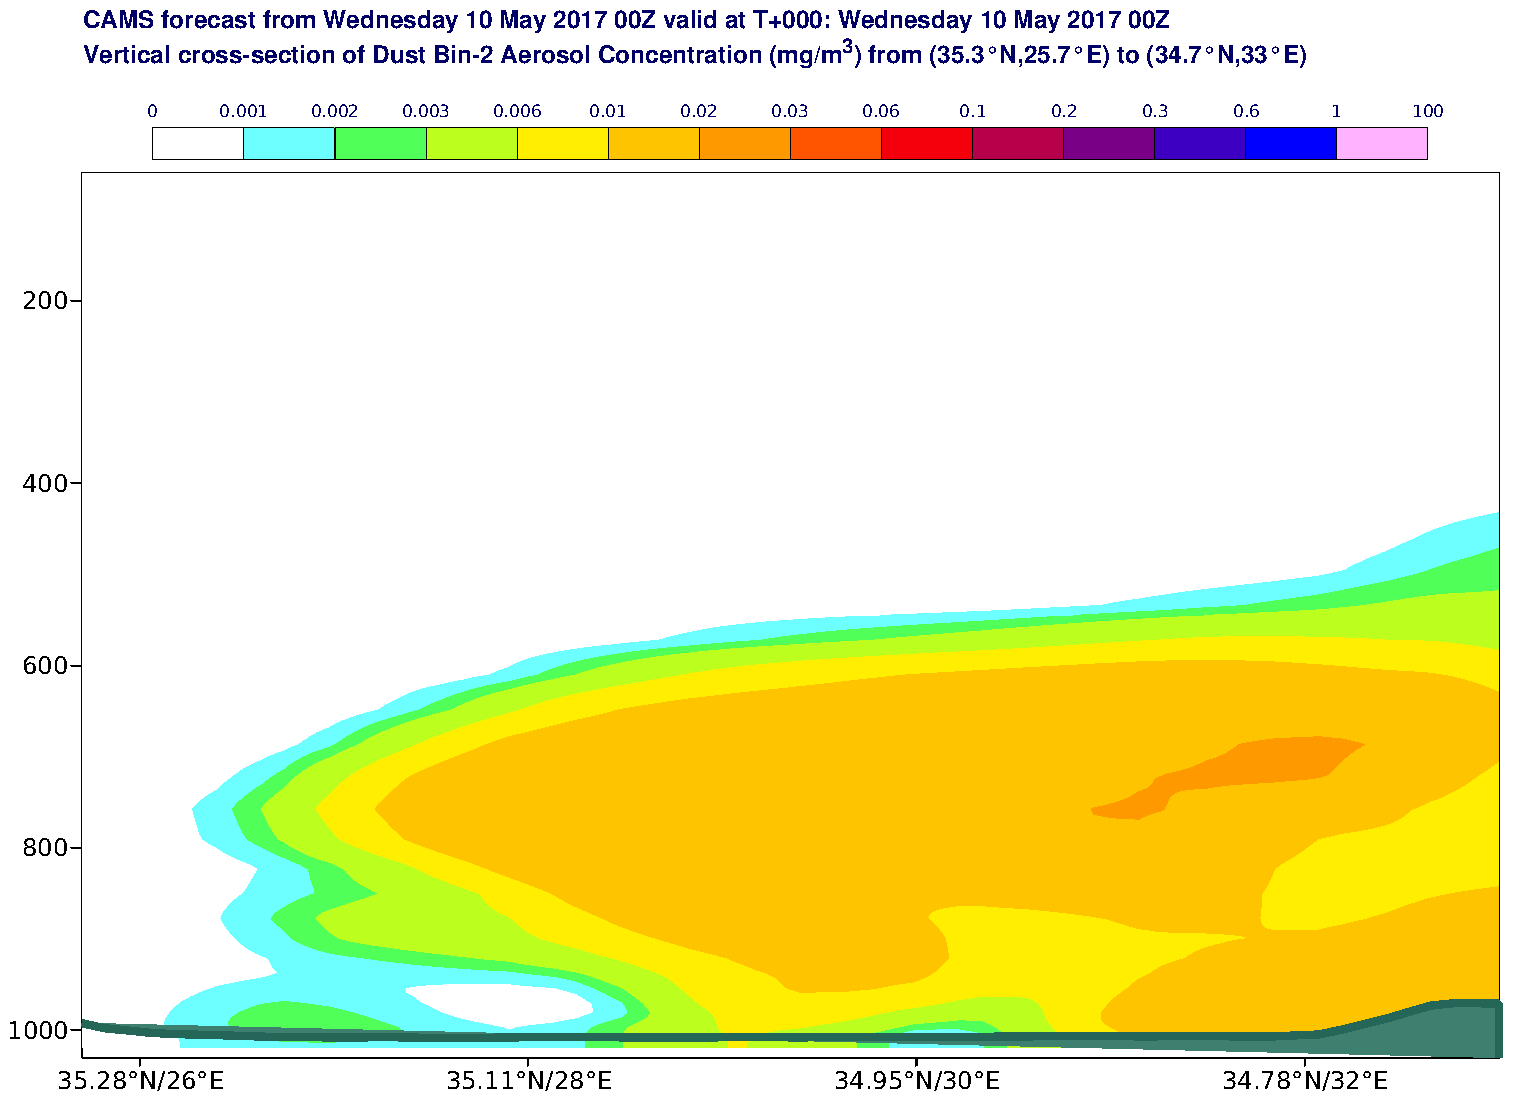 Vertical cross-section of Dust Bin-2 Aerosol Concentration (mg/m3) valid at T0 - 2017-05-10 00:00